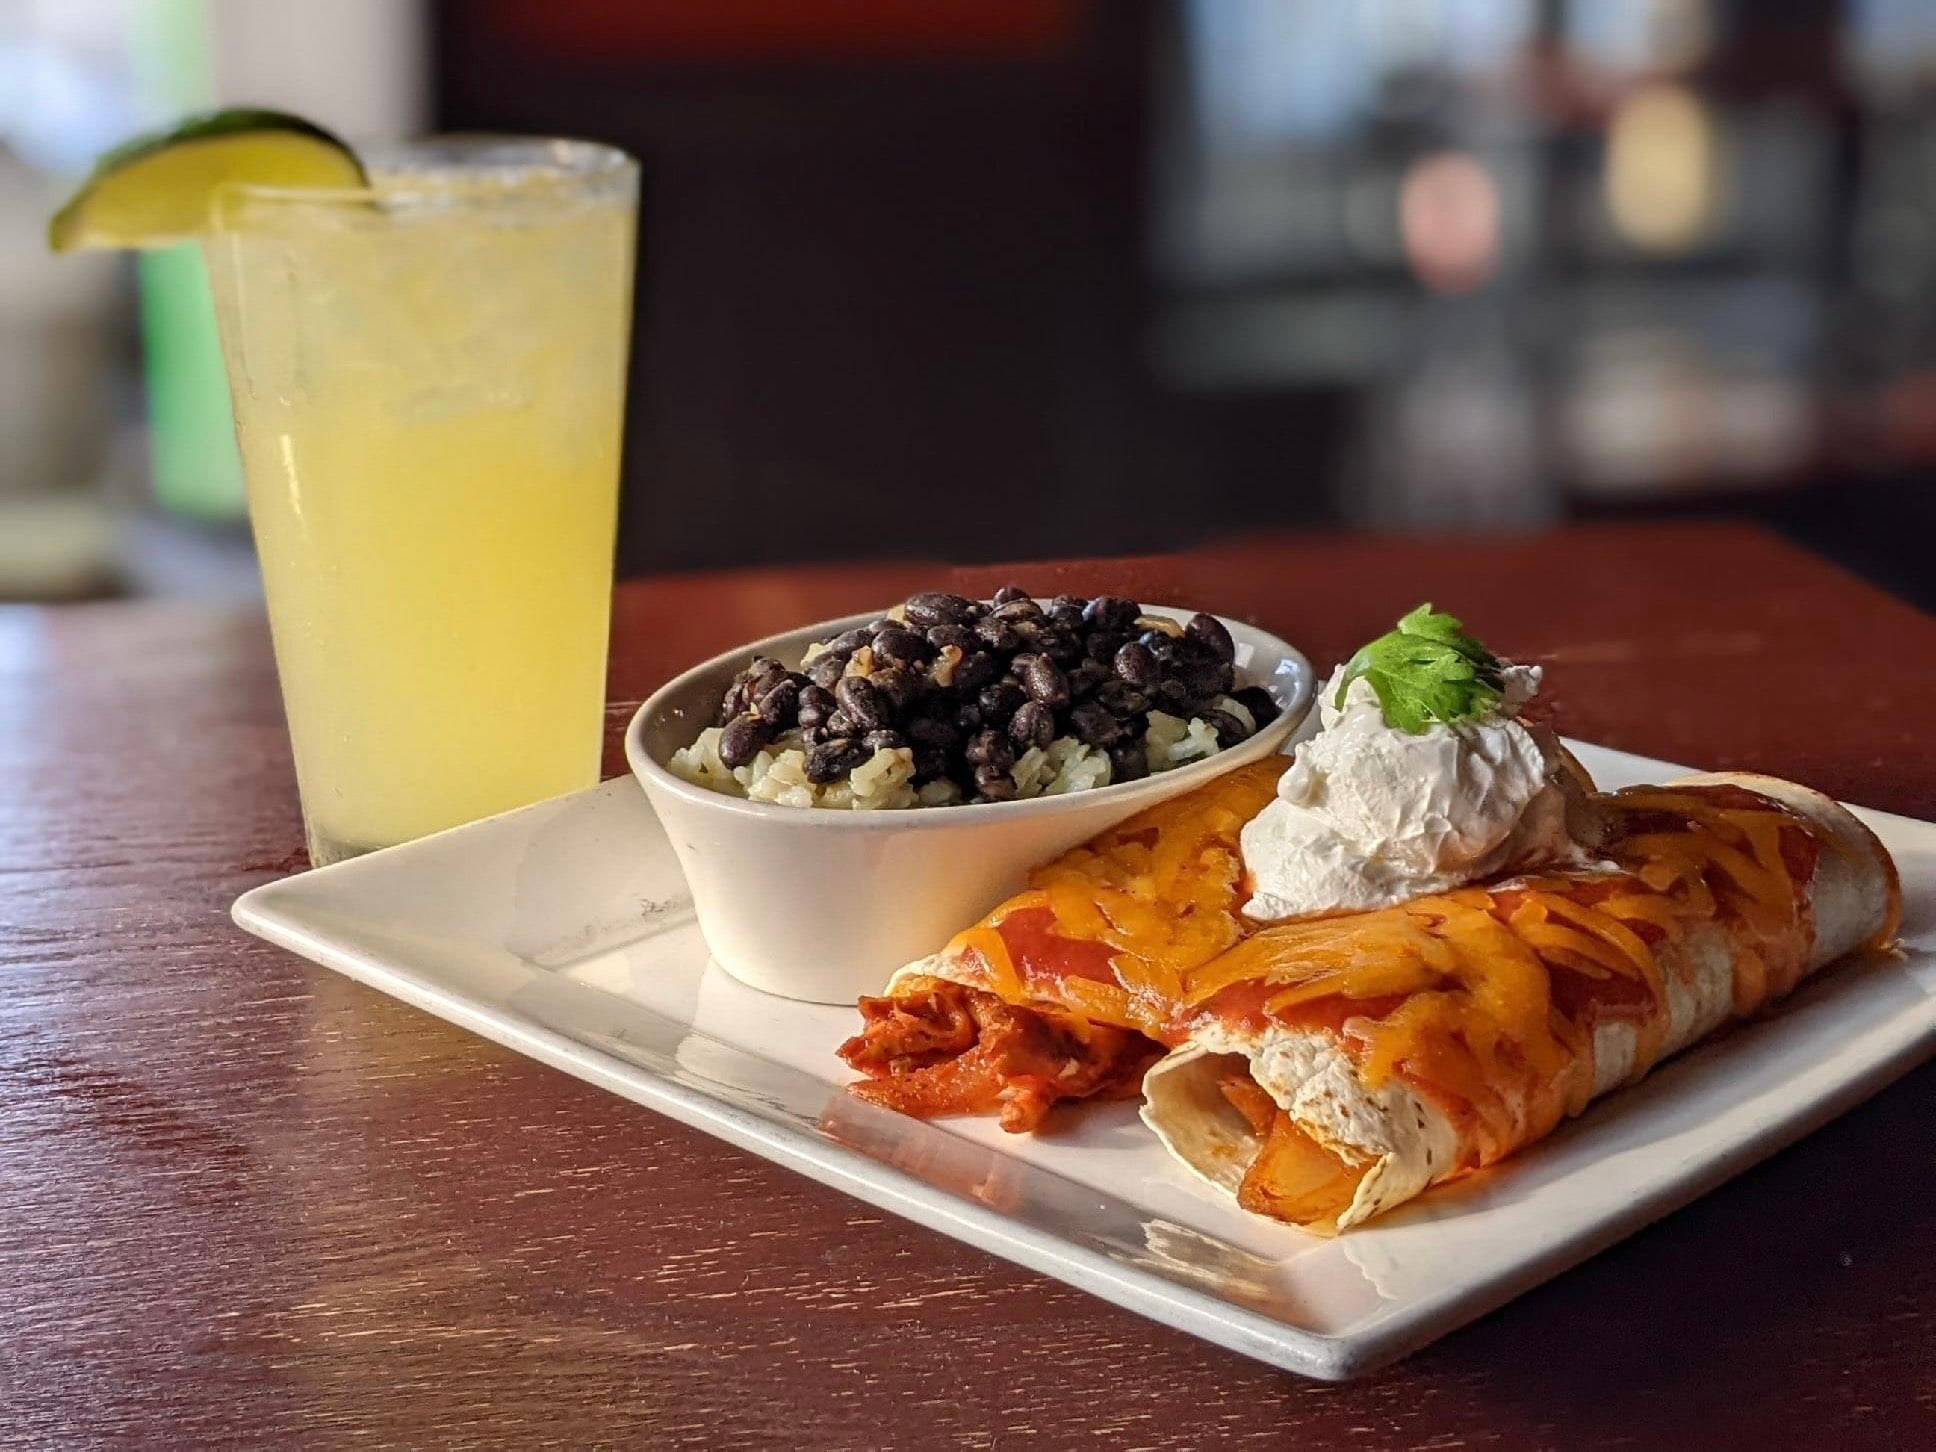 Enchiladas and black beans with rice along side mixed drink